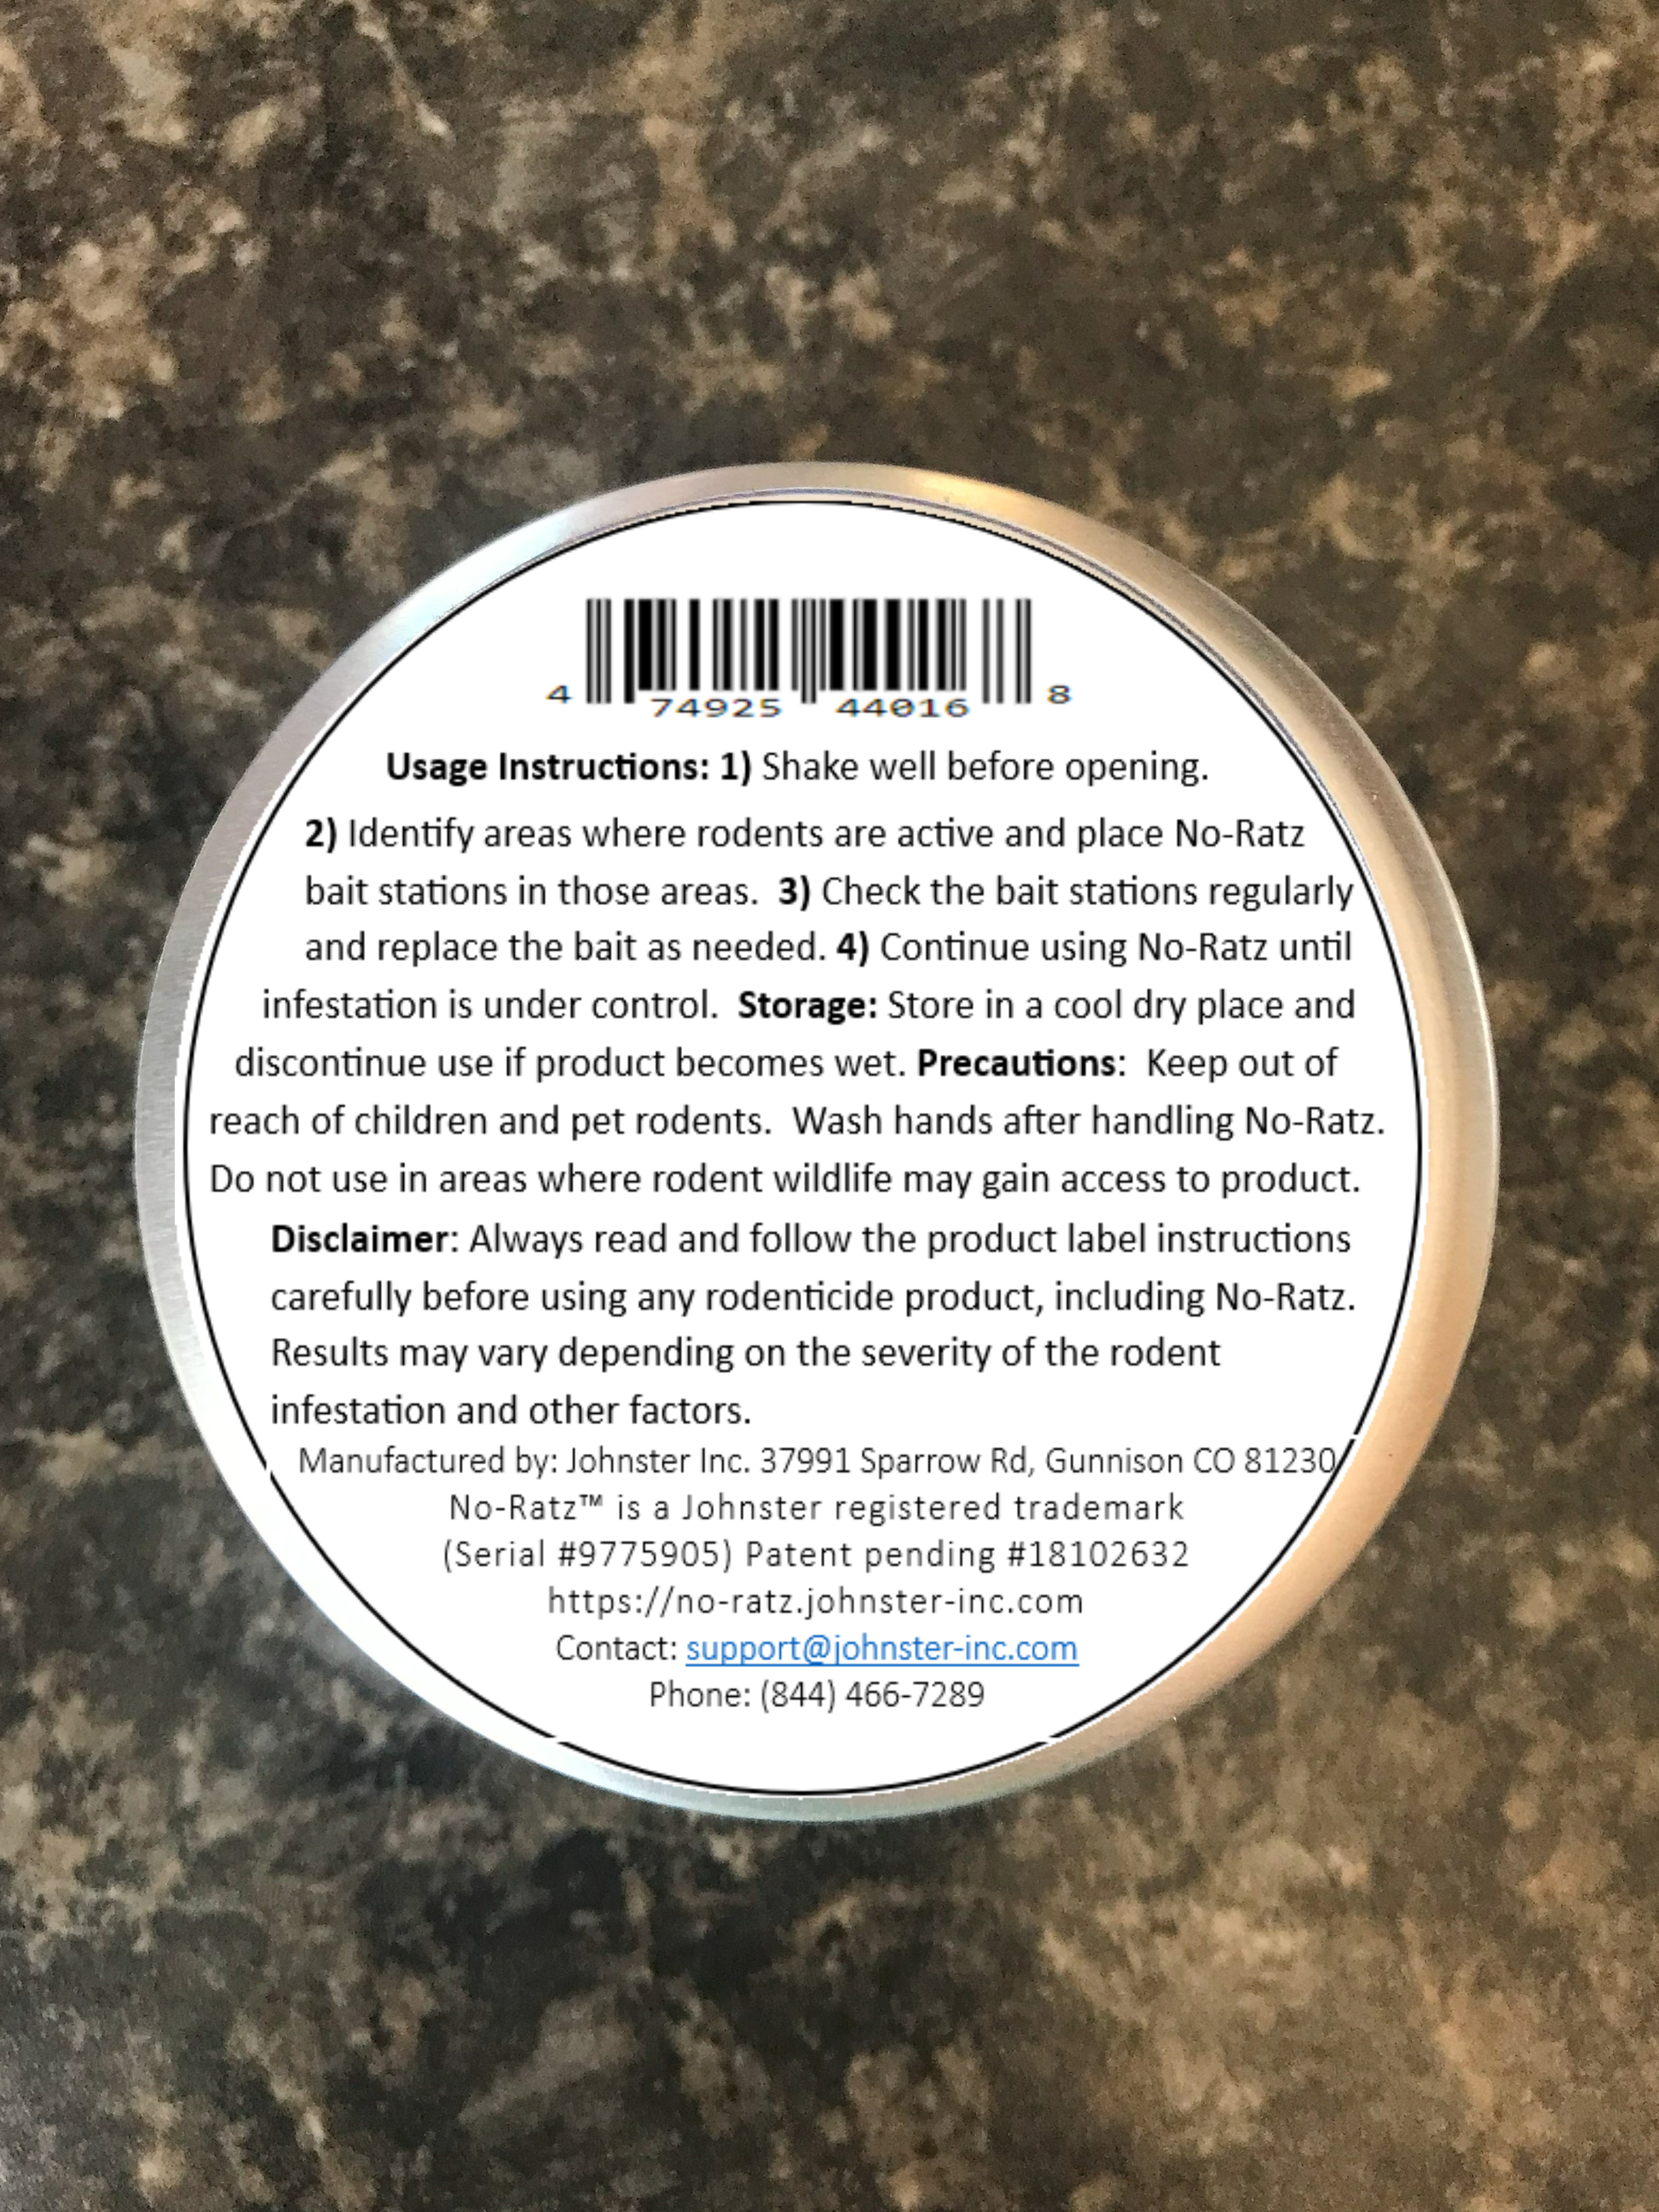 No-Ratz back label including directions and bar code